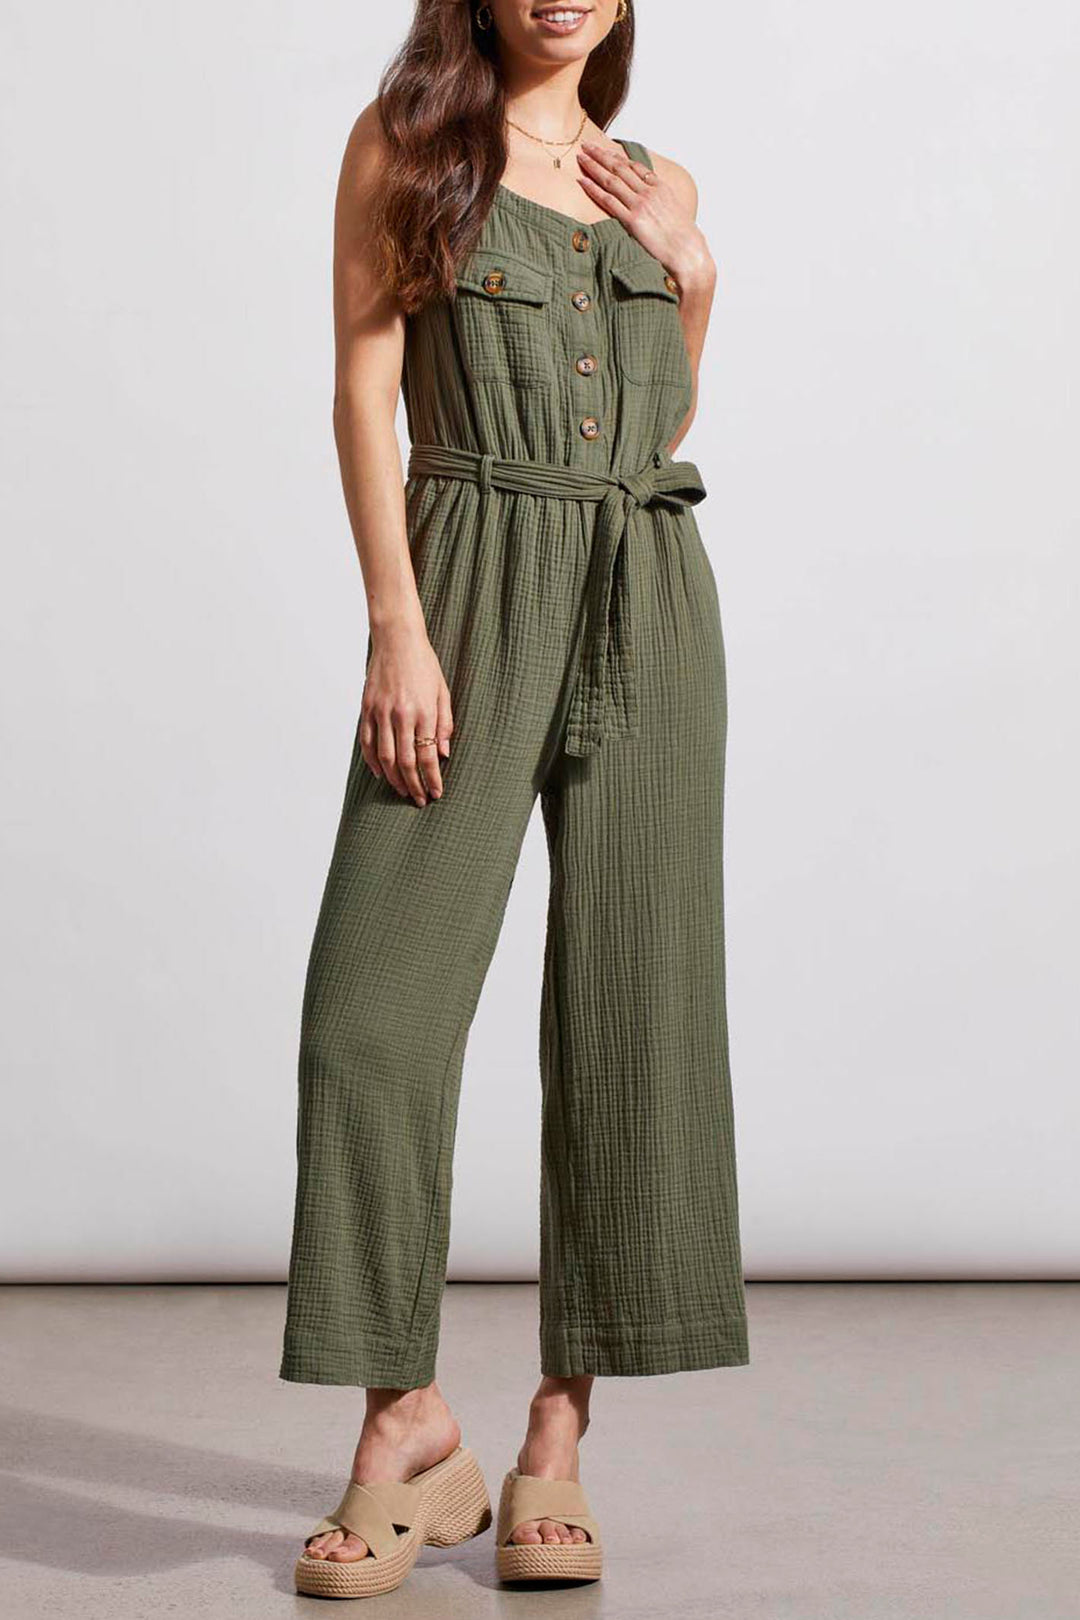 Tribal 7676O Fern Green Cotton Jumpsuit - Experience Boutique